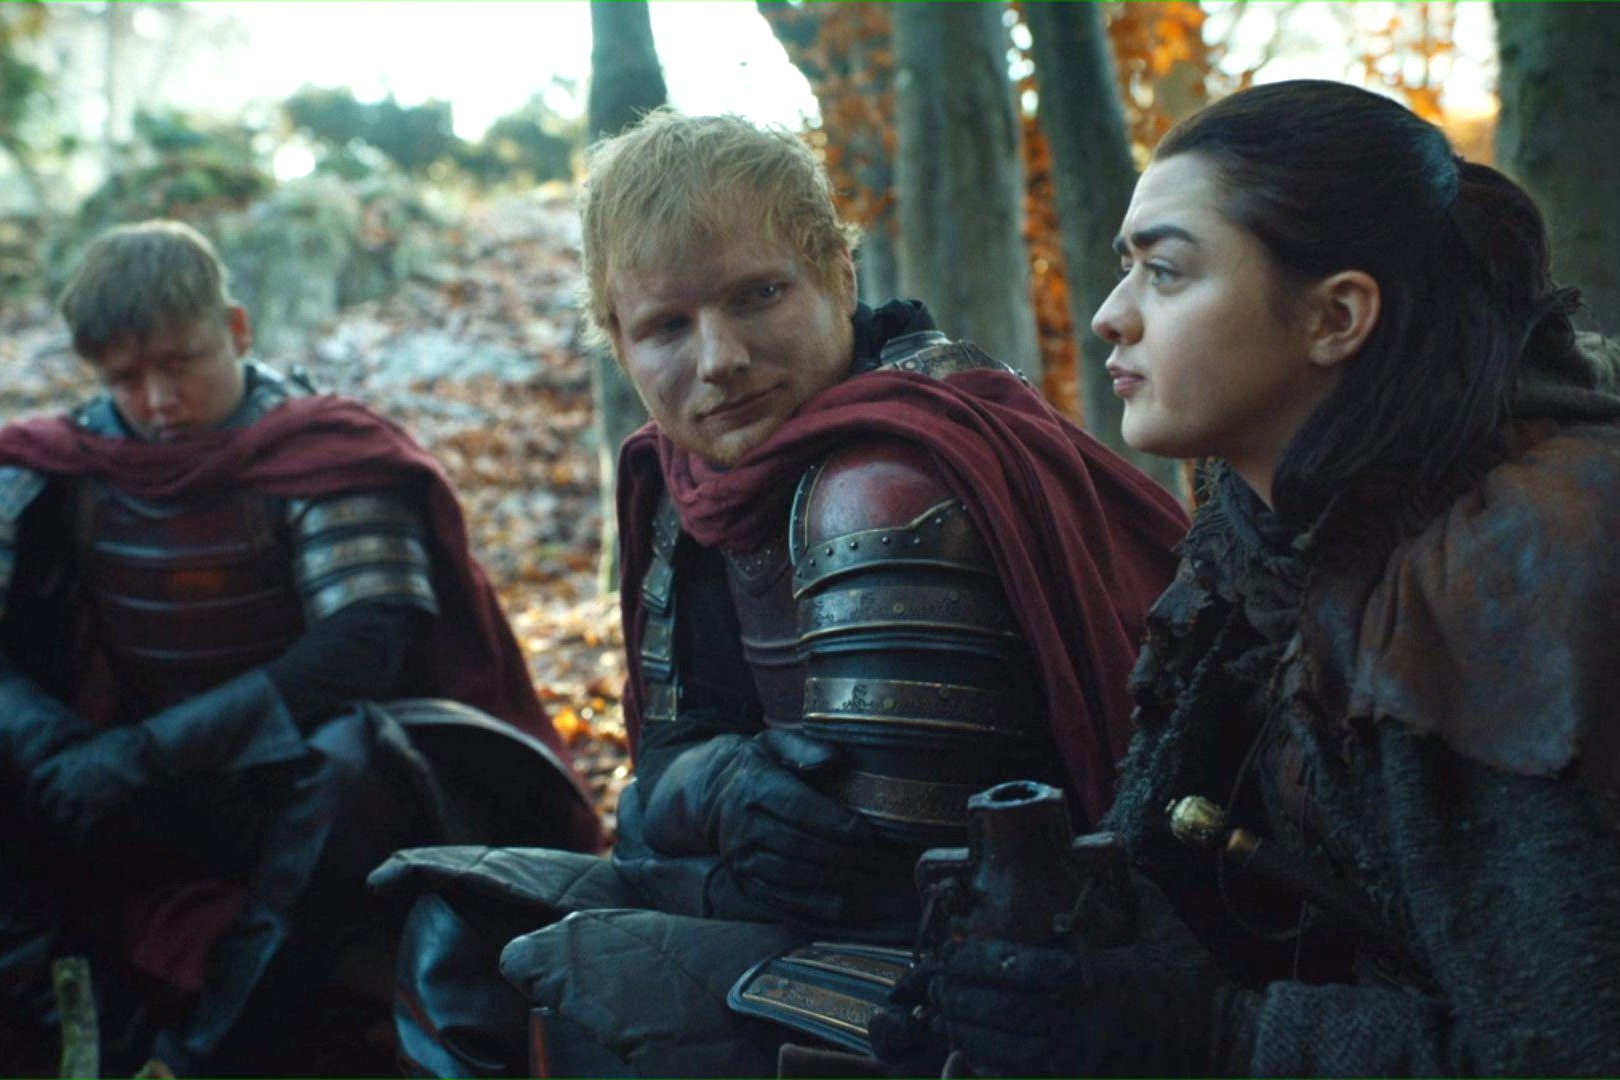 Fans Outraged By Ed Sheeran's Game Of Thrones Performance